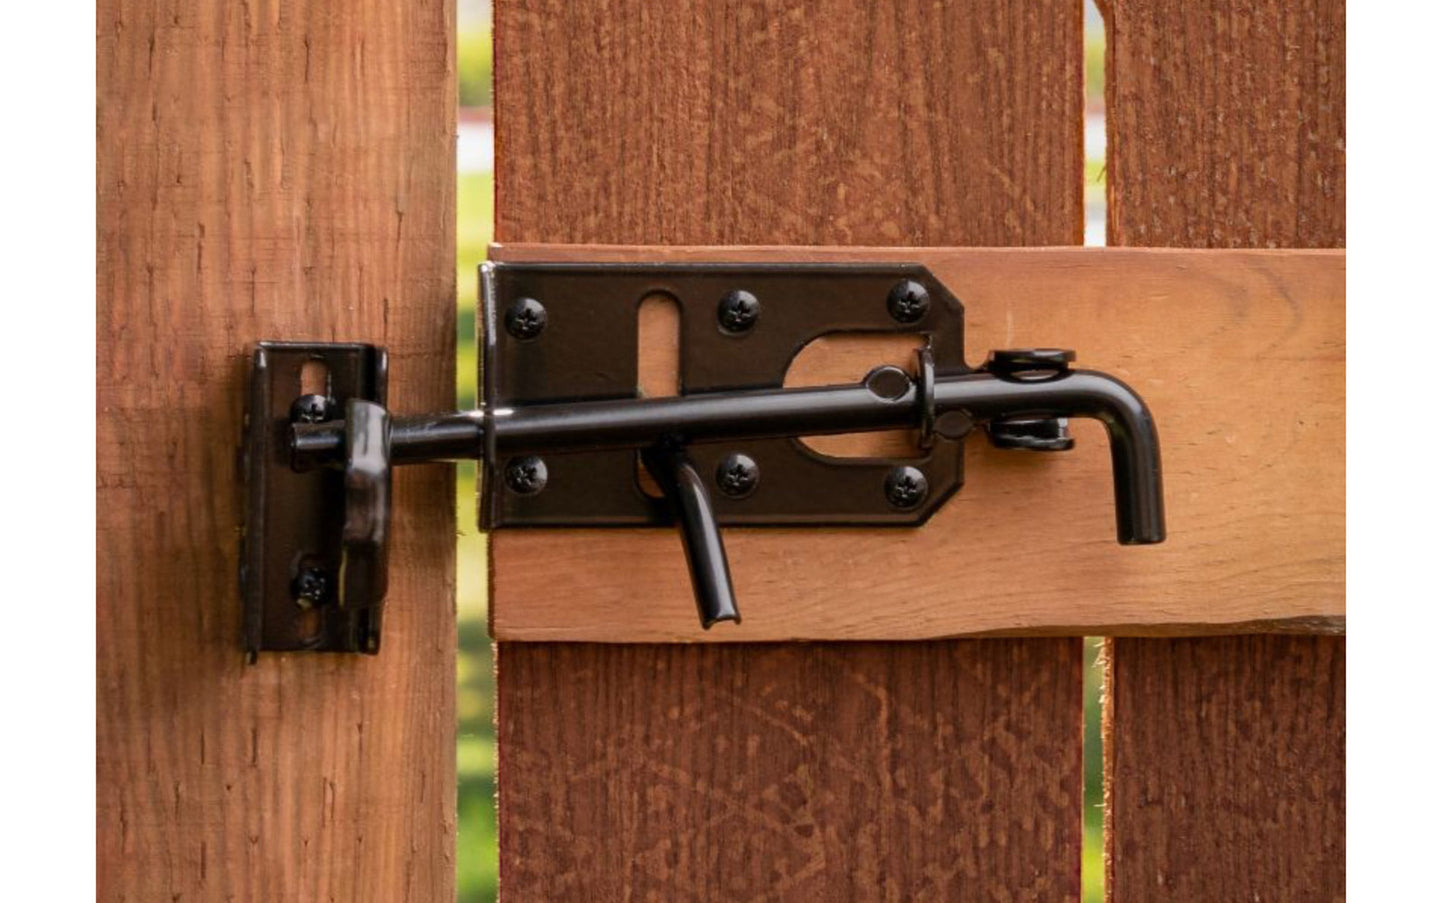 This Black Finish Gate Latch Set works like a heavy-duty barrel bolt plus deadbolt. Operates with thumb latch when in unsecured position. For use on in-swinging or out-swinging gates. Bolt can be padlocked. Fits gate up to 3" thick. National Hardware Catalog Model No. N178-616. 038613178618